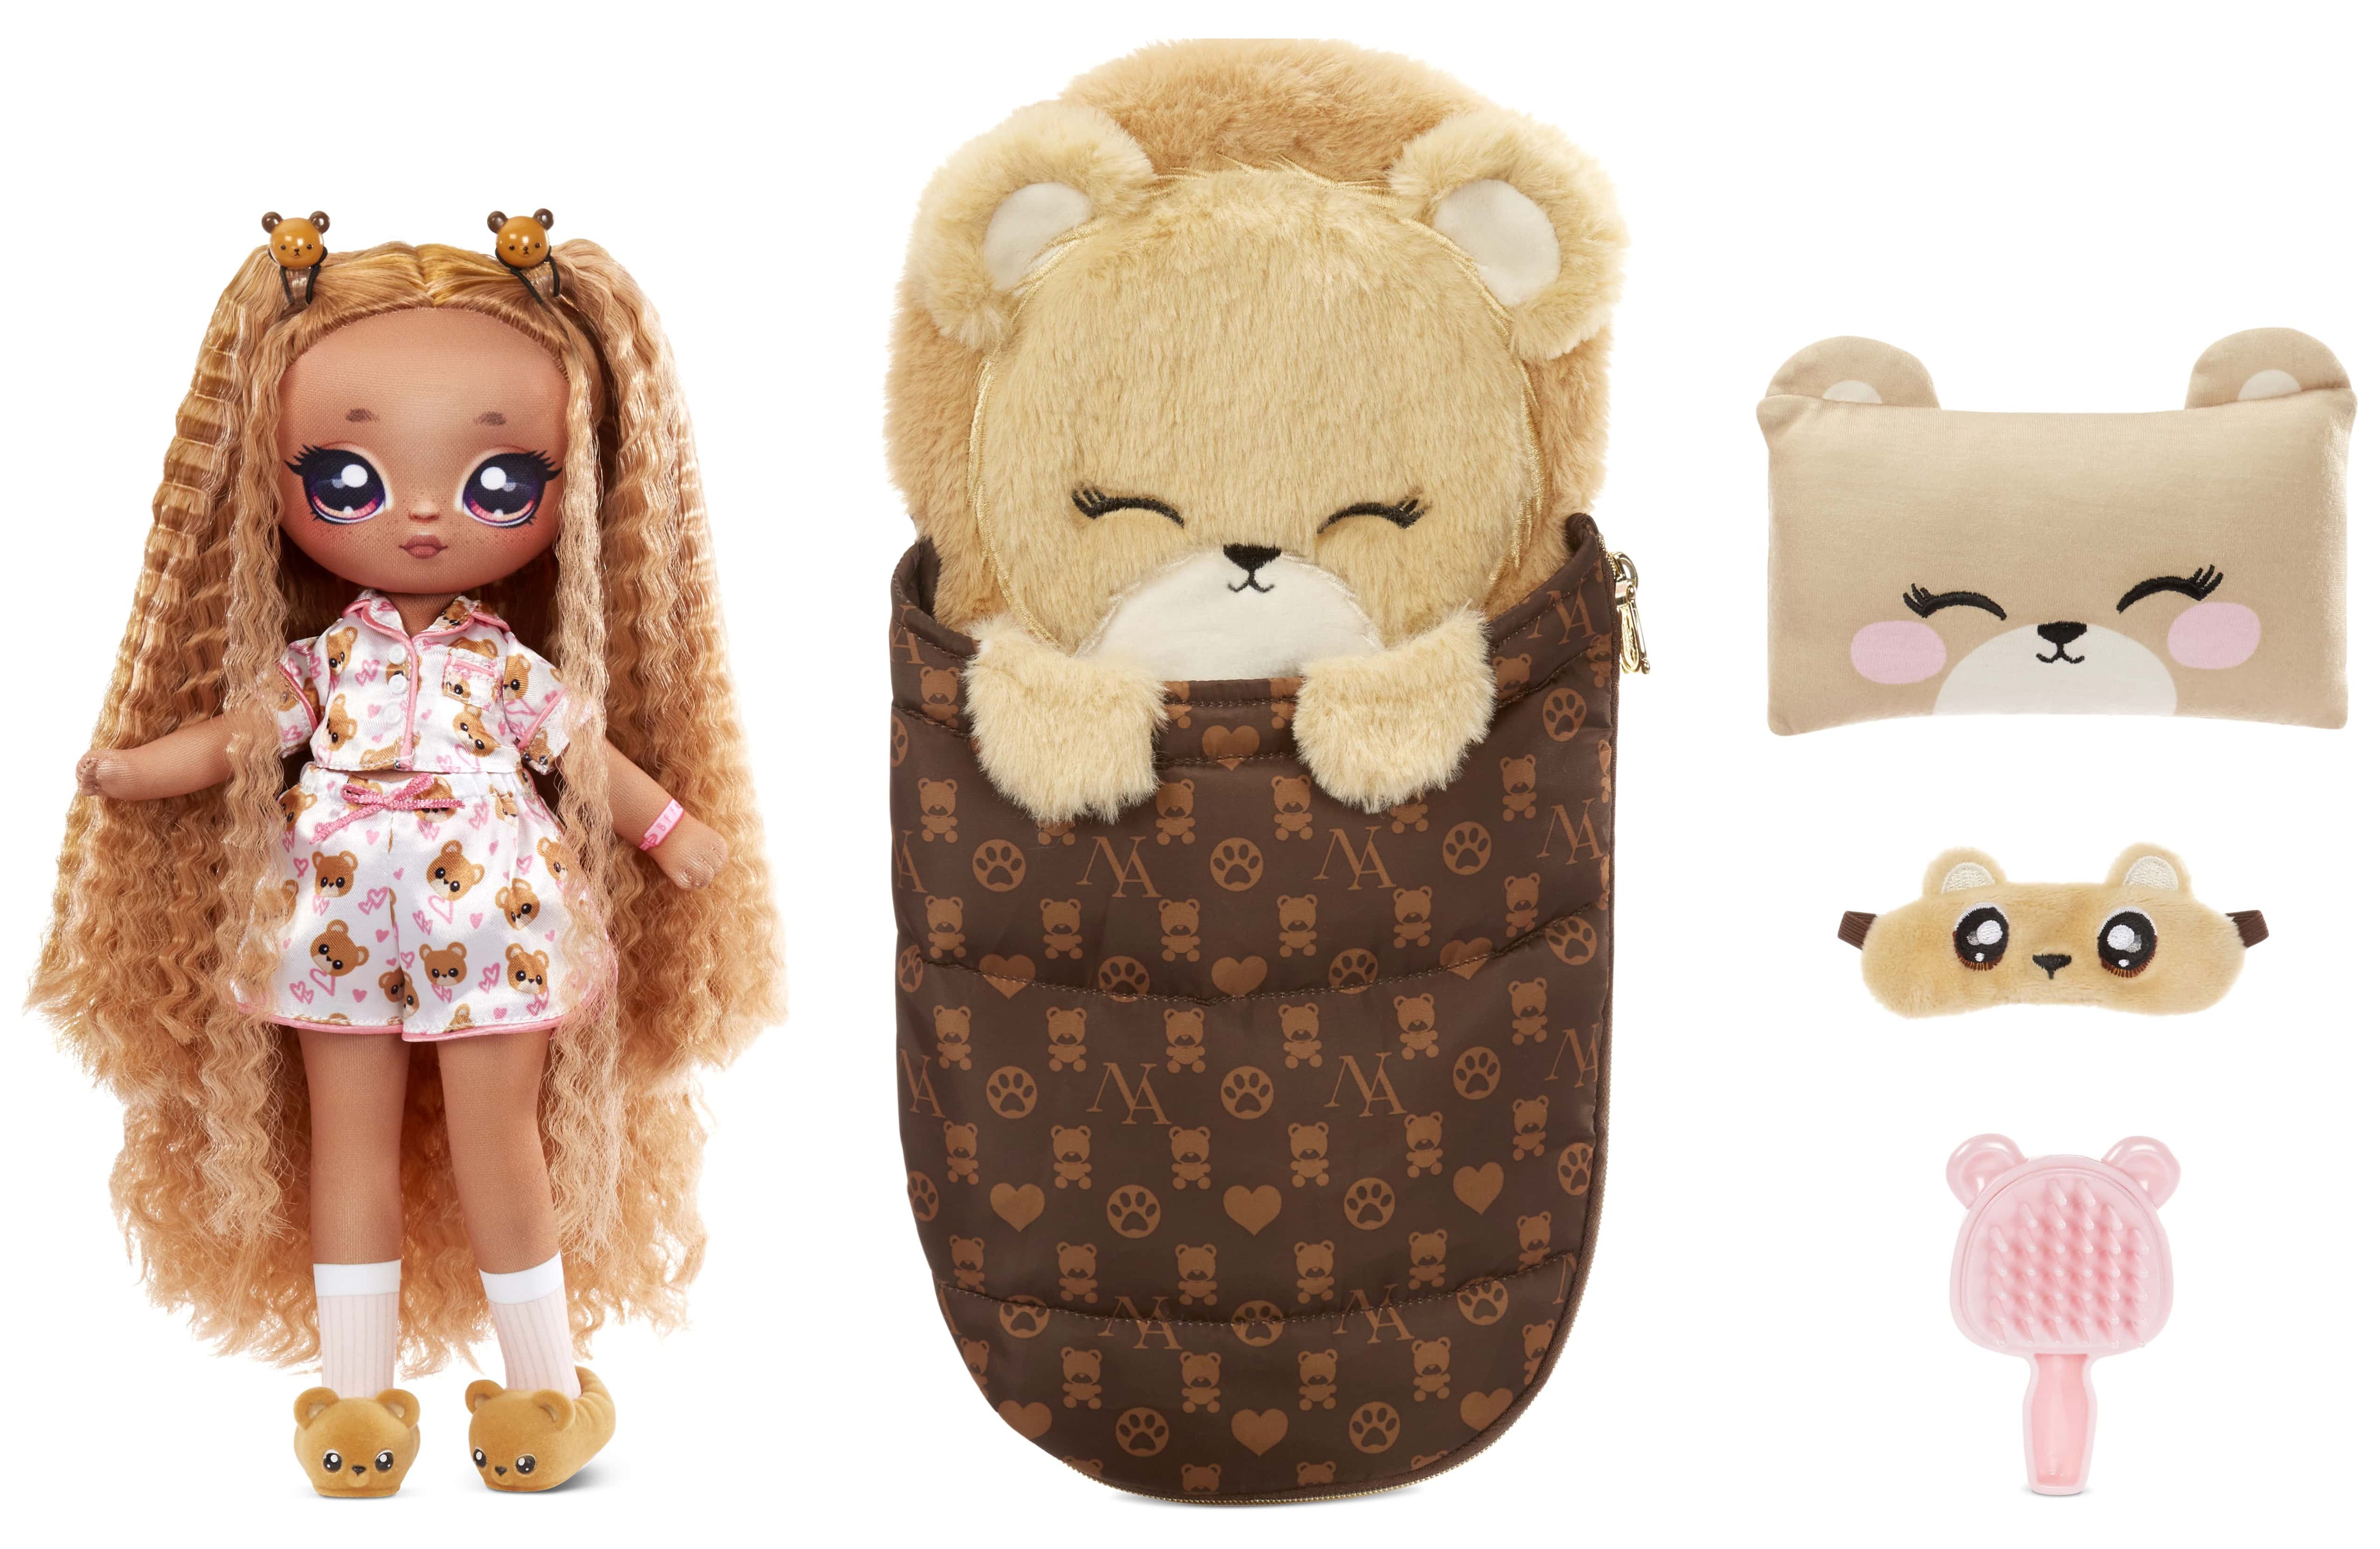 Na Na Na Surprise Teens™ Slumber Party Fashion Doll – Lara Vonn, 11 inch Soft Fabric Doll, Teddy Bear Inspired with Brunette Hair - image 3 of 7